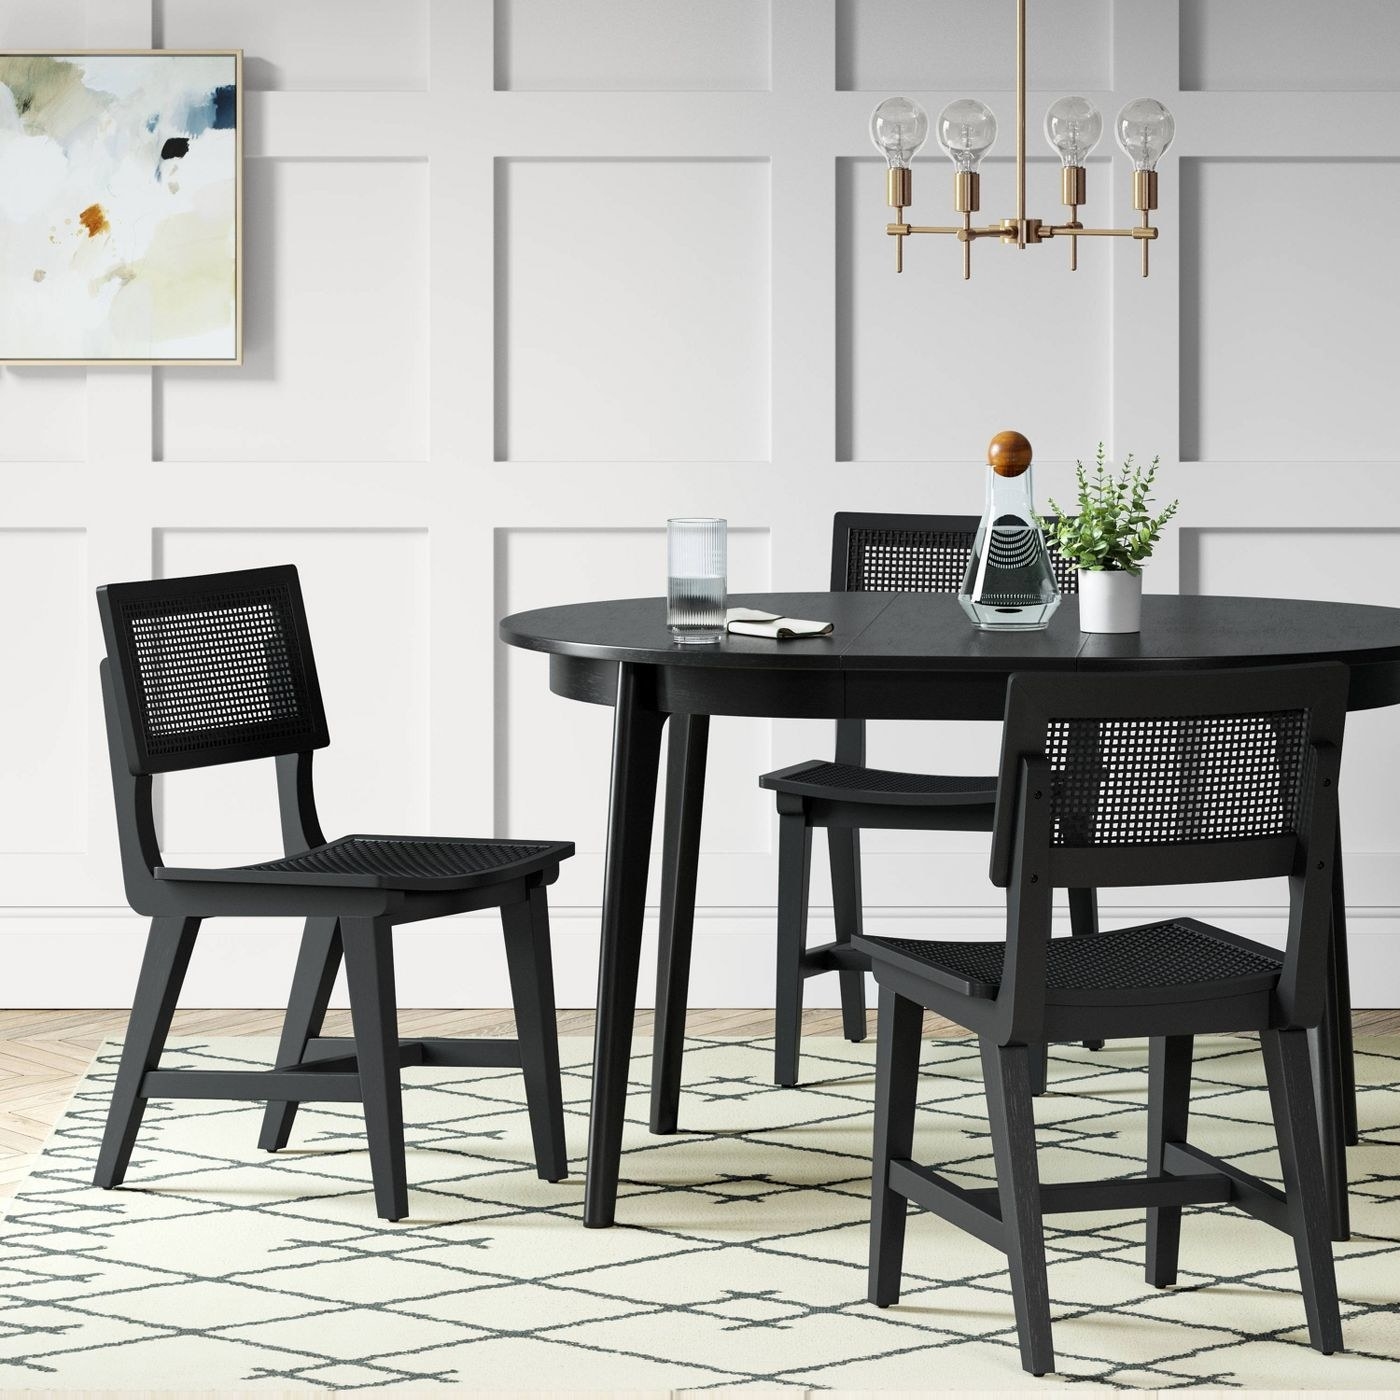 a black wooden kitchen table